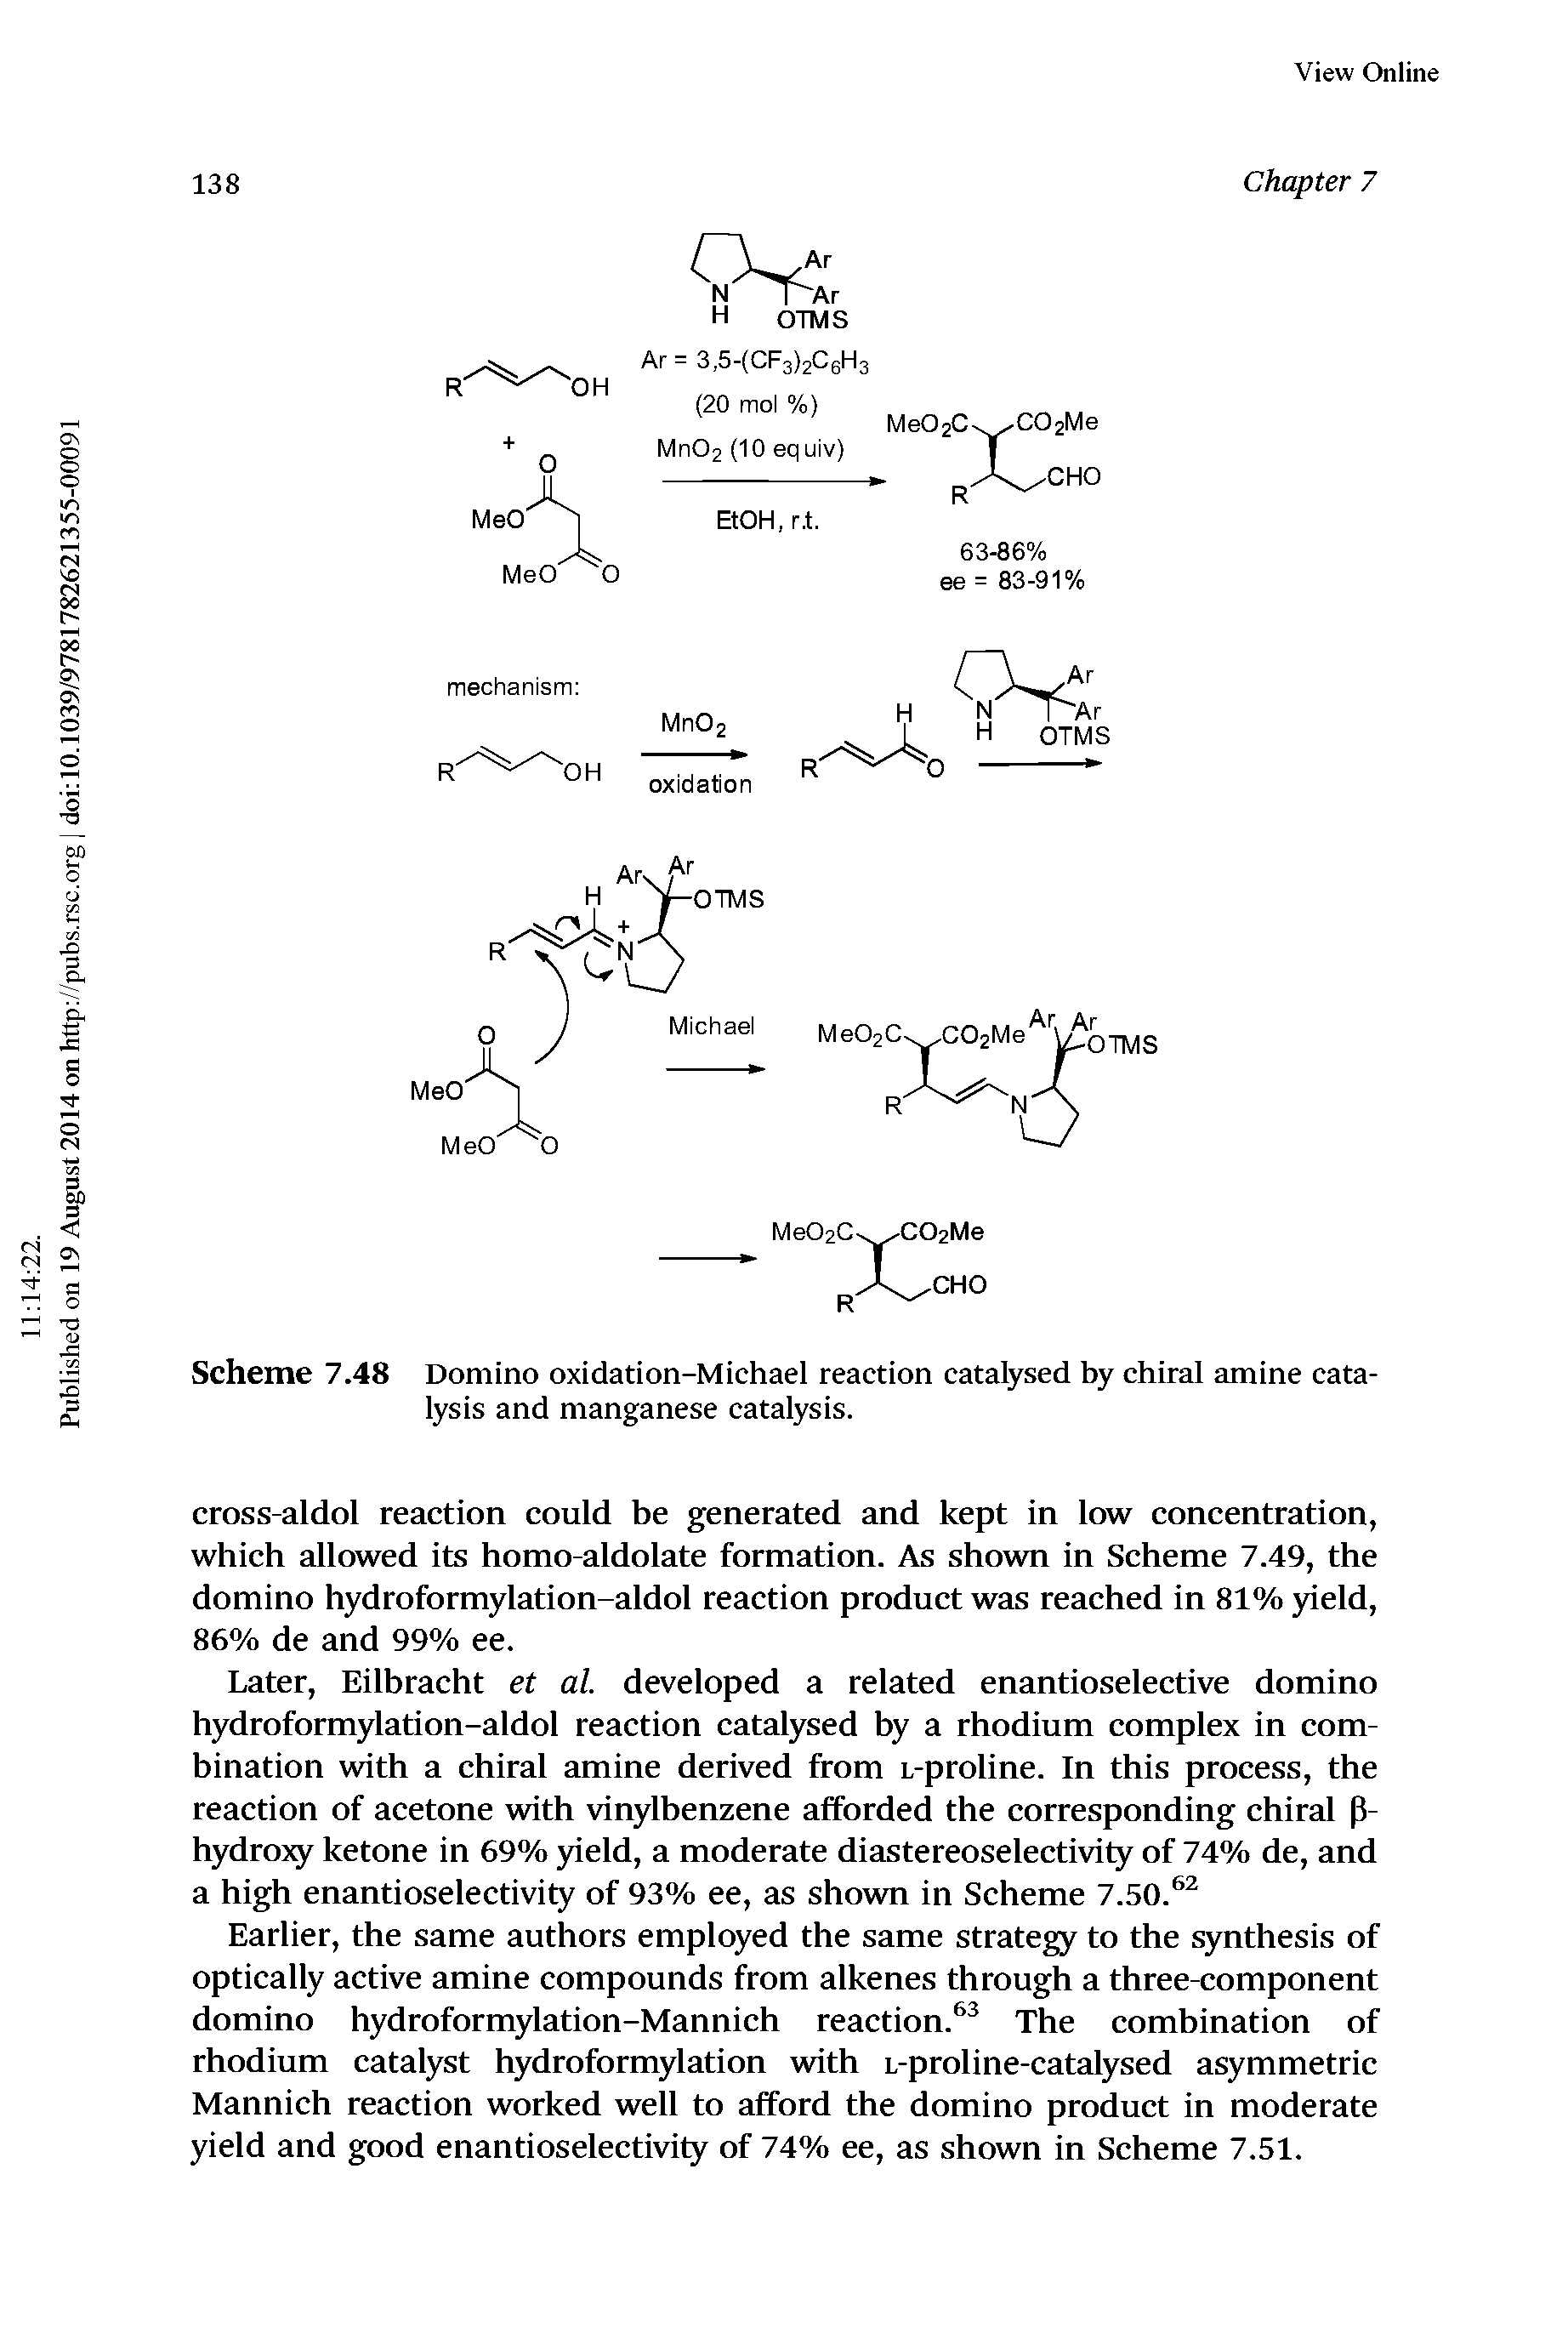 Scheme 7.48 Domino oxidation-Michael reaction catalysed by chiral amine catalysis and manganese catalysis.